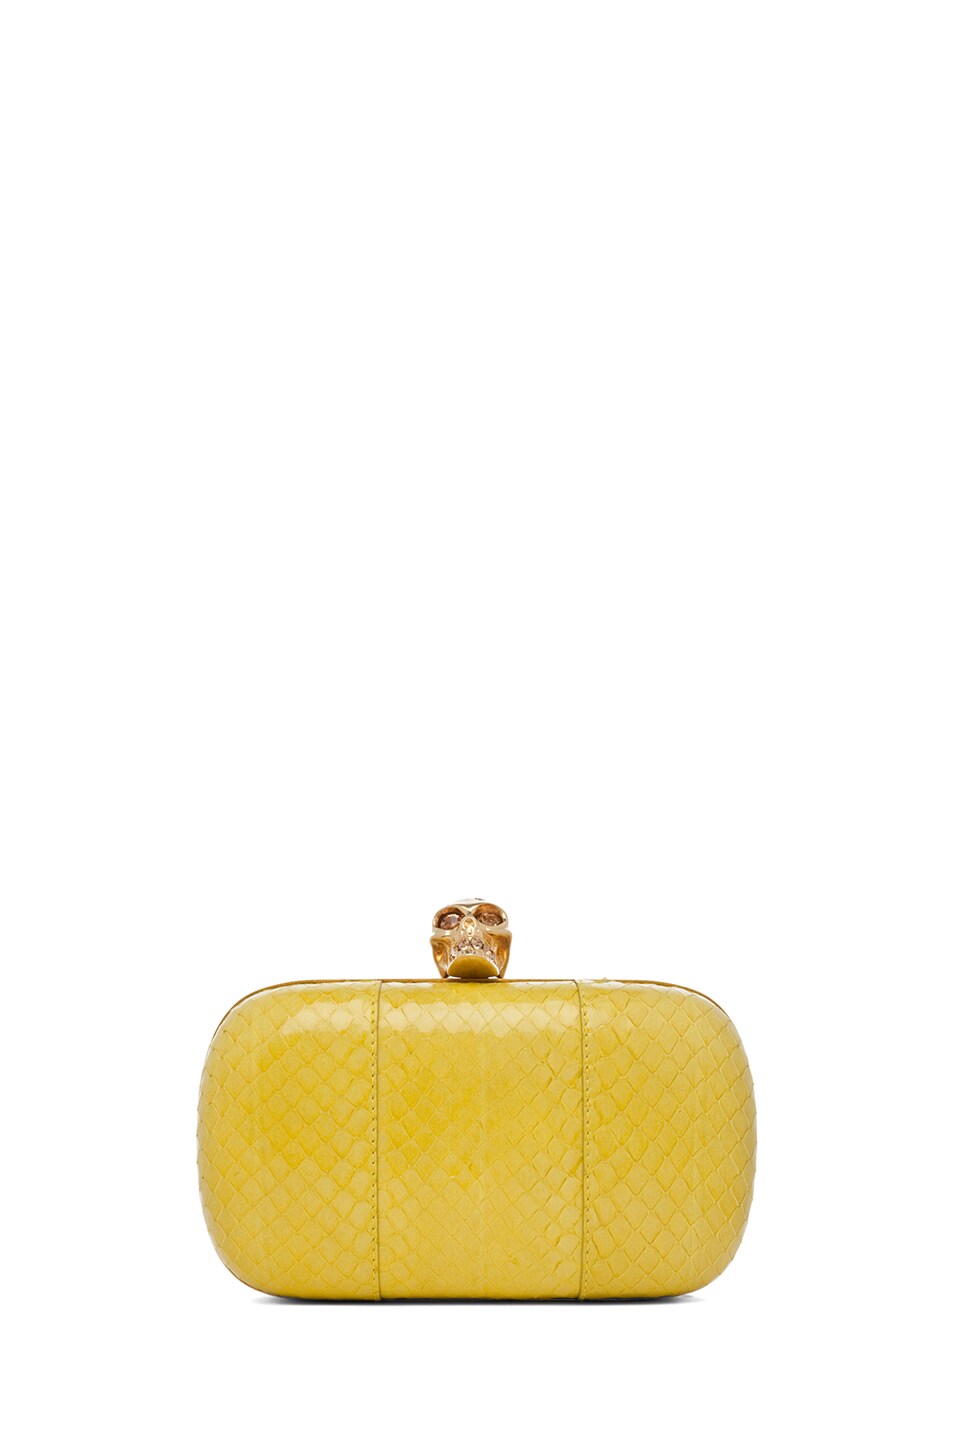 Image 1 of Alexander McQueen Whips Classic Skull Box Clutch in Bright Yellow